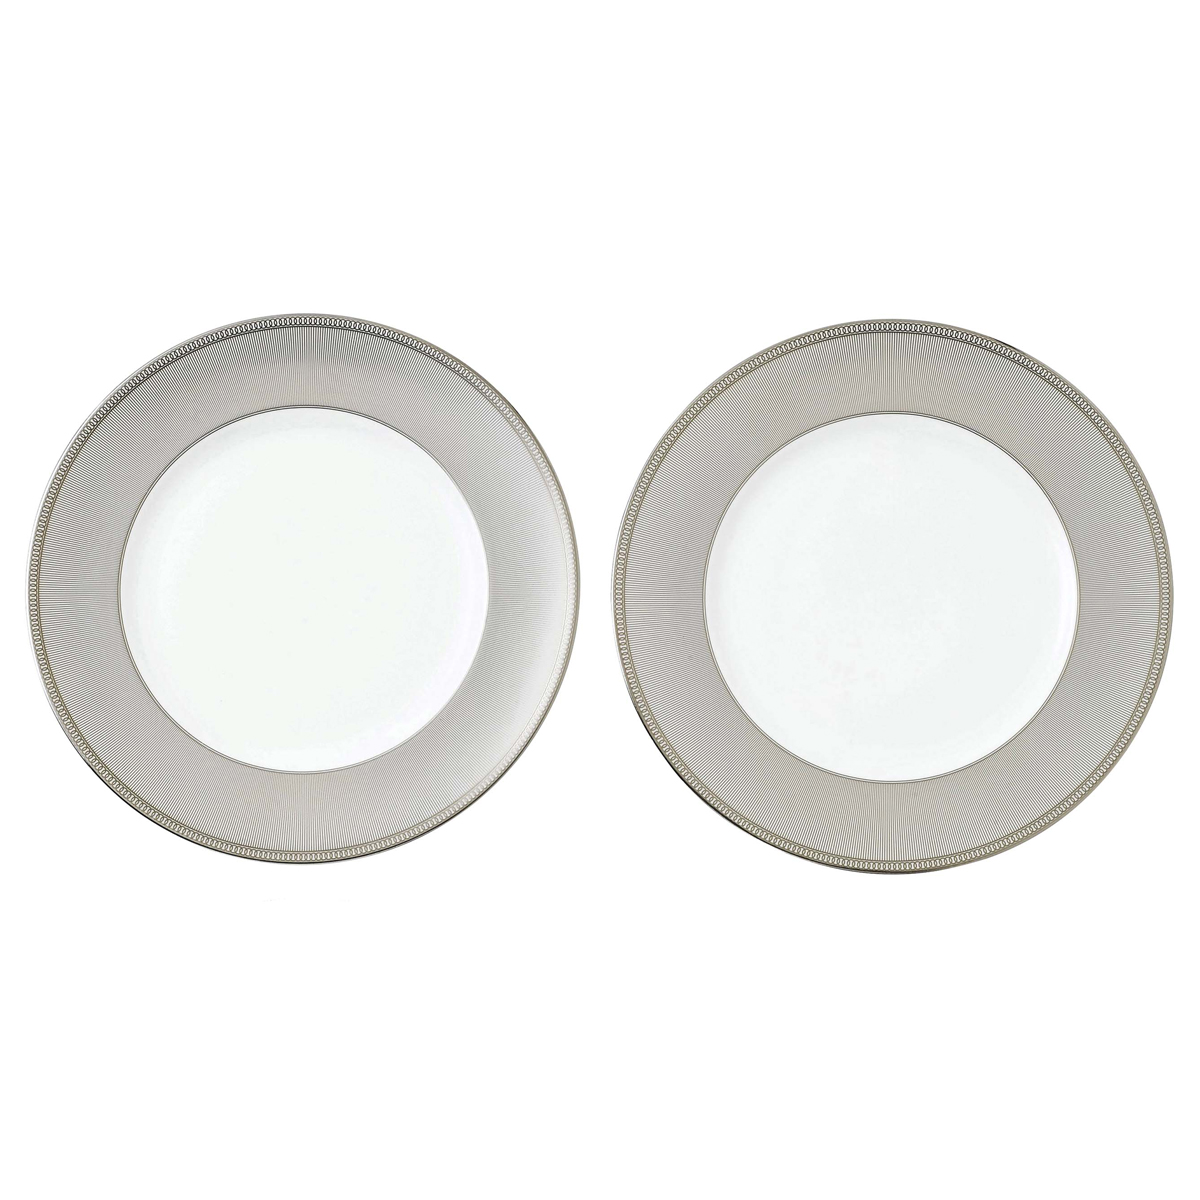 Wedgwood 2023 Winter White Plate 10.7in, Pair